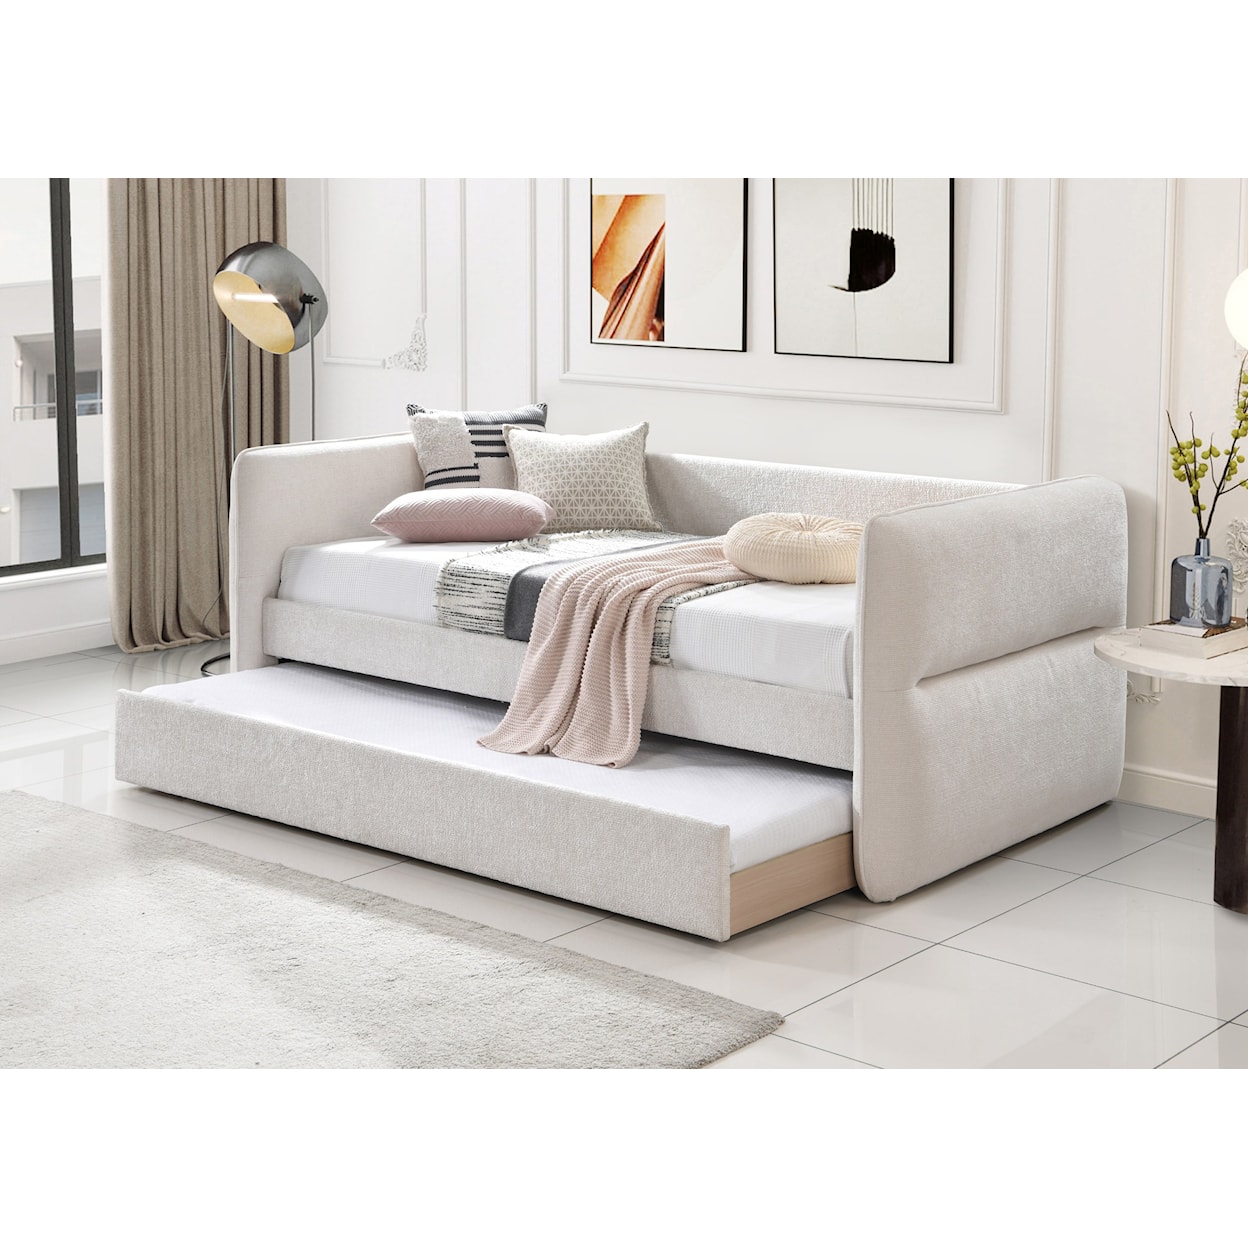 CM PHILIPA Daybed